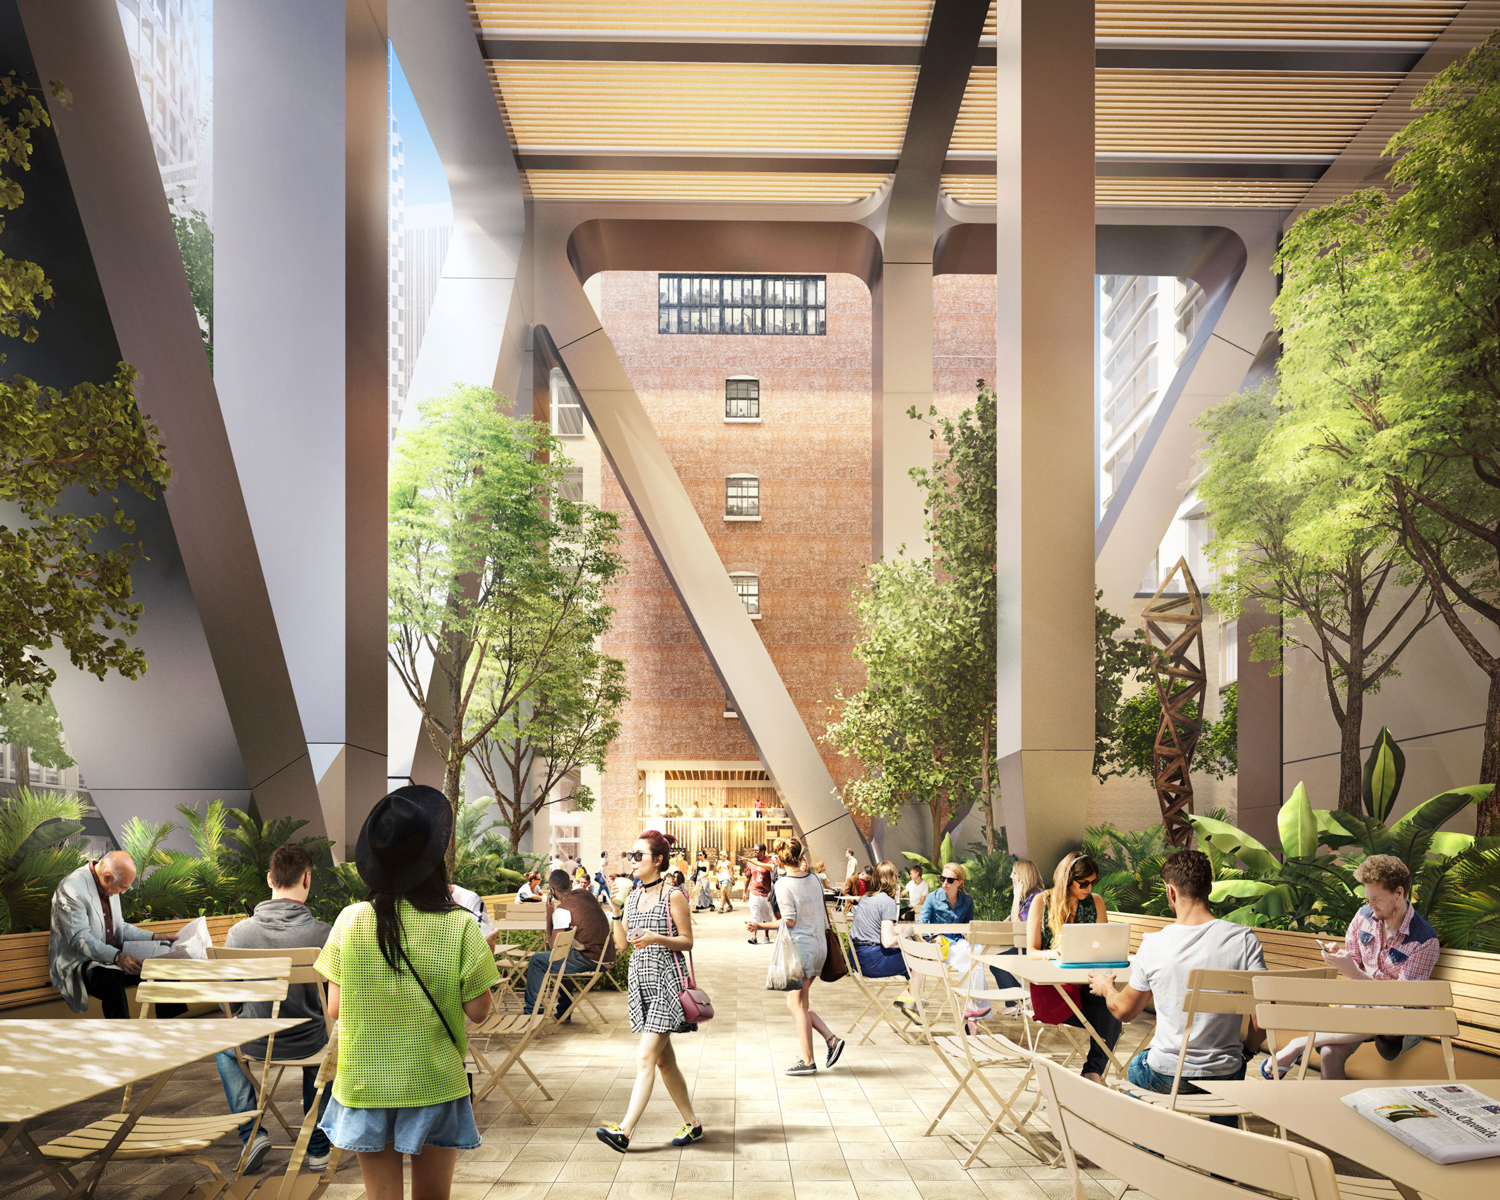 Oceanwide Center base plaza, rendering of design by Foster and Partners